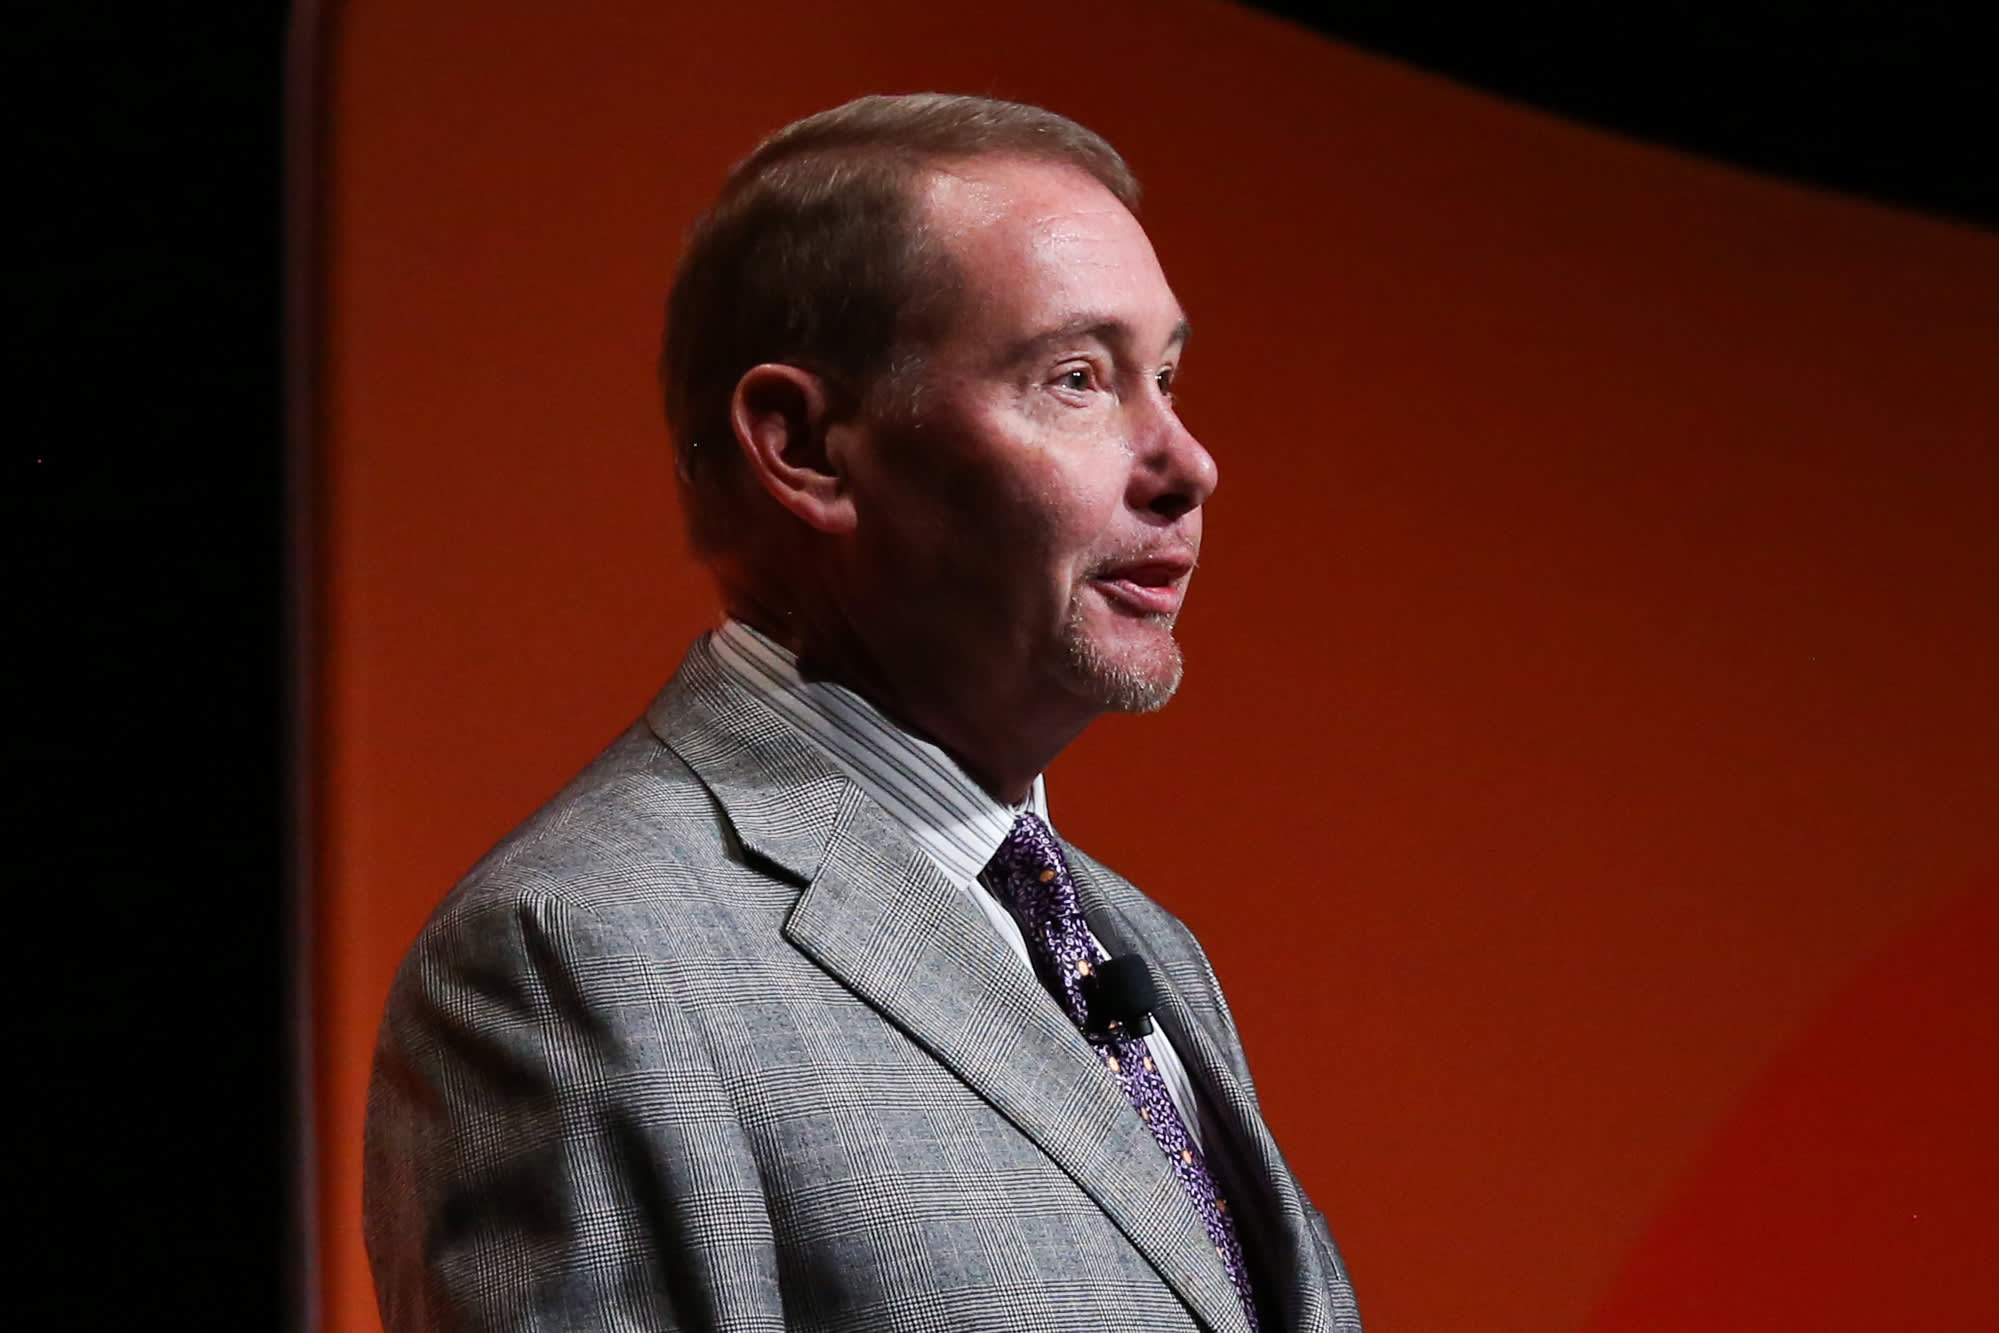 Gundlach on crypto: ‘I’d certainly not be a buyer today’ during market washout